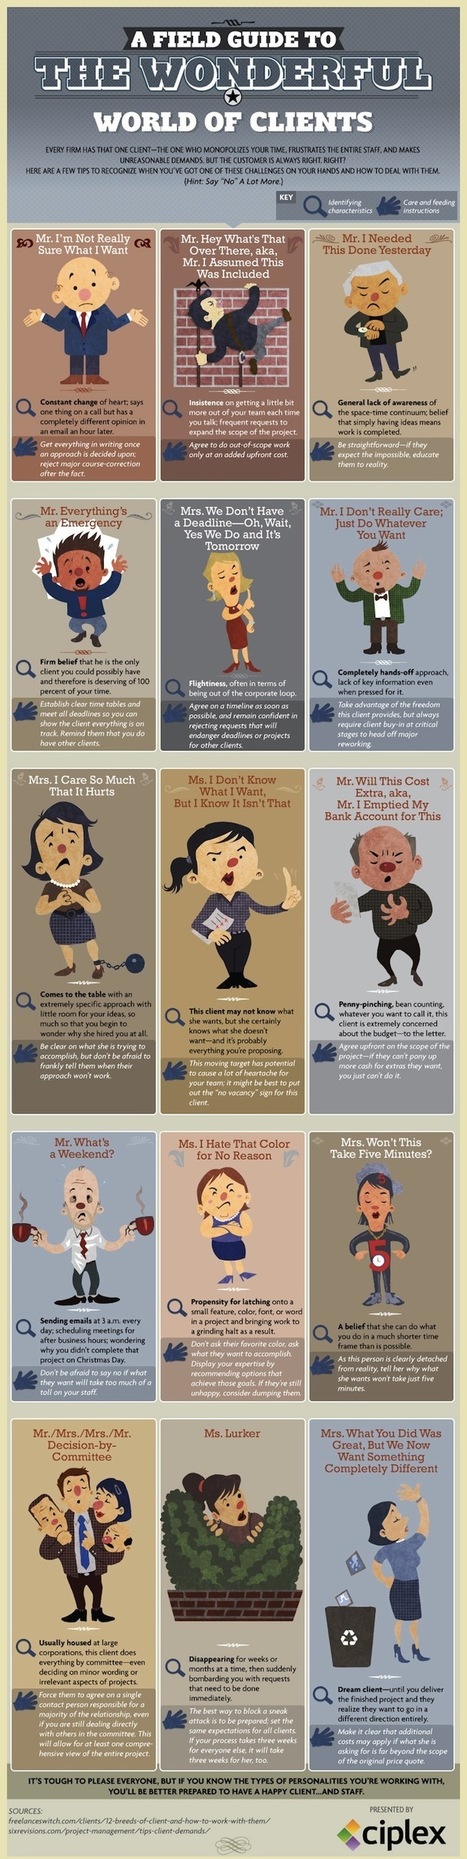 A Field Guide to the Wonderful World of Clients [INFOGRAPHIC] | FRESH | Scoop.it